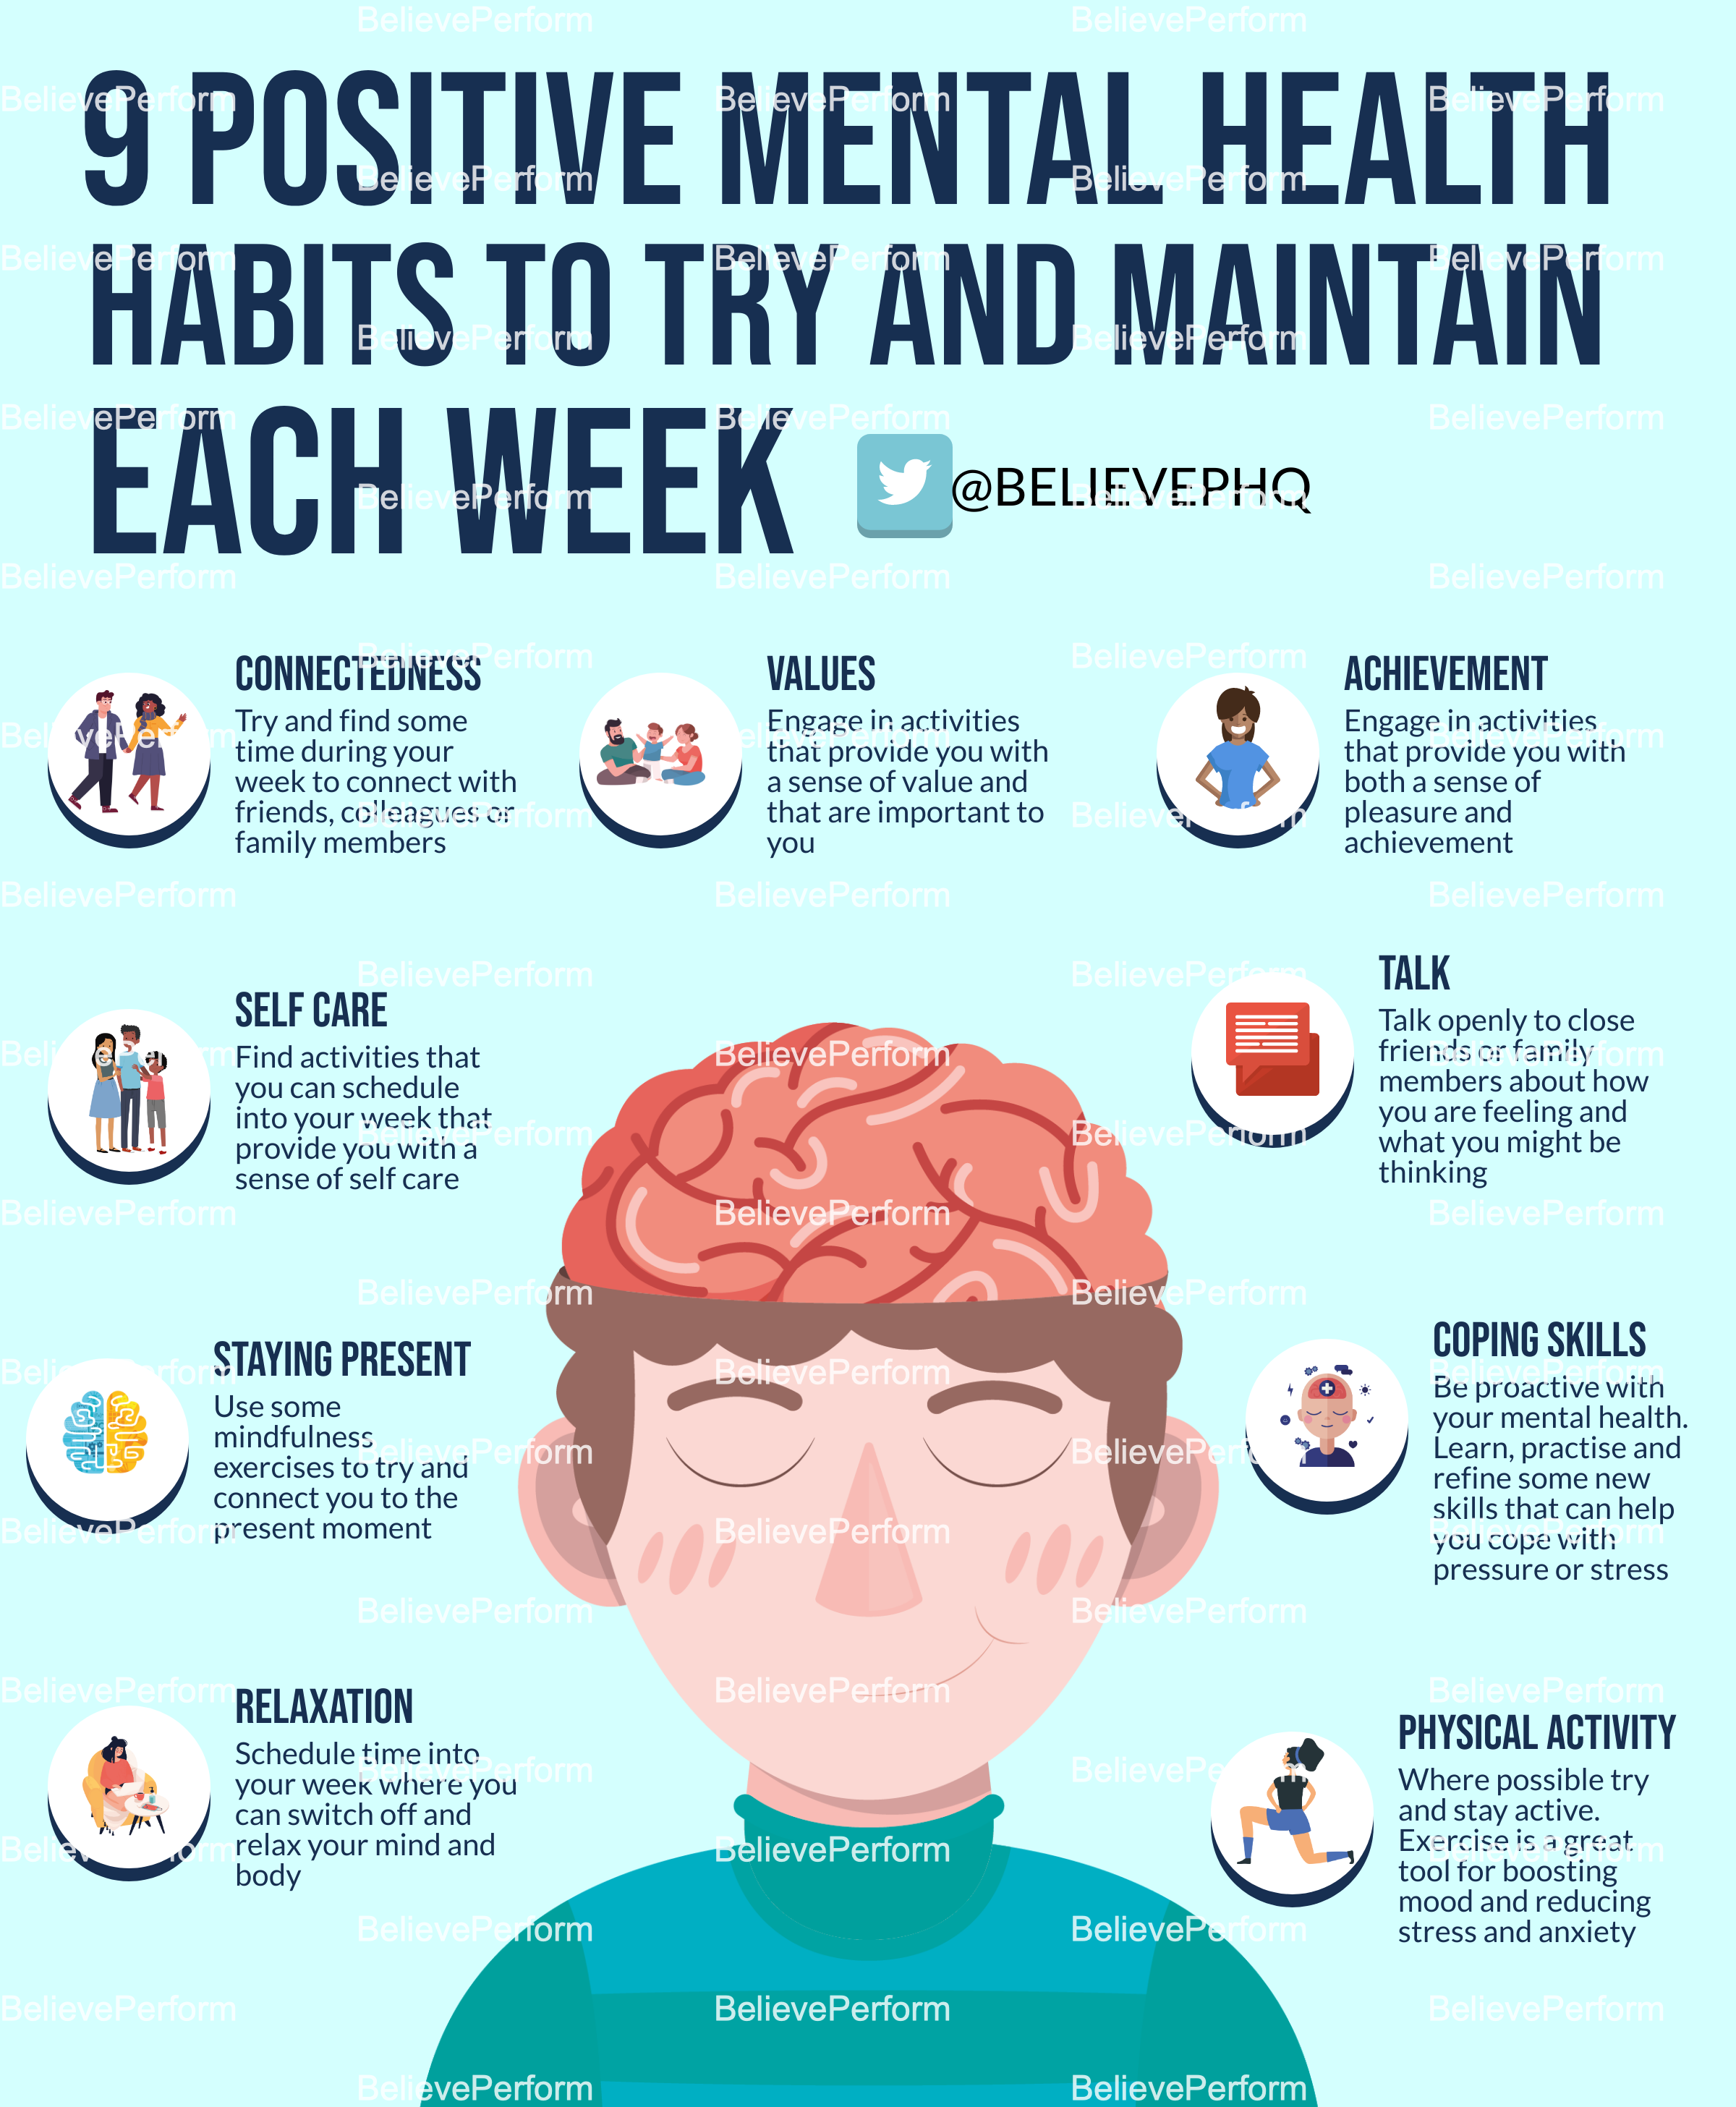 9-positive-mental-health-habits-to-try-and-maintain-each-week.png